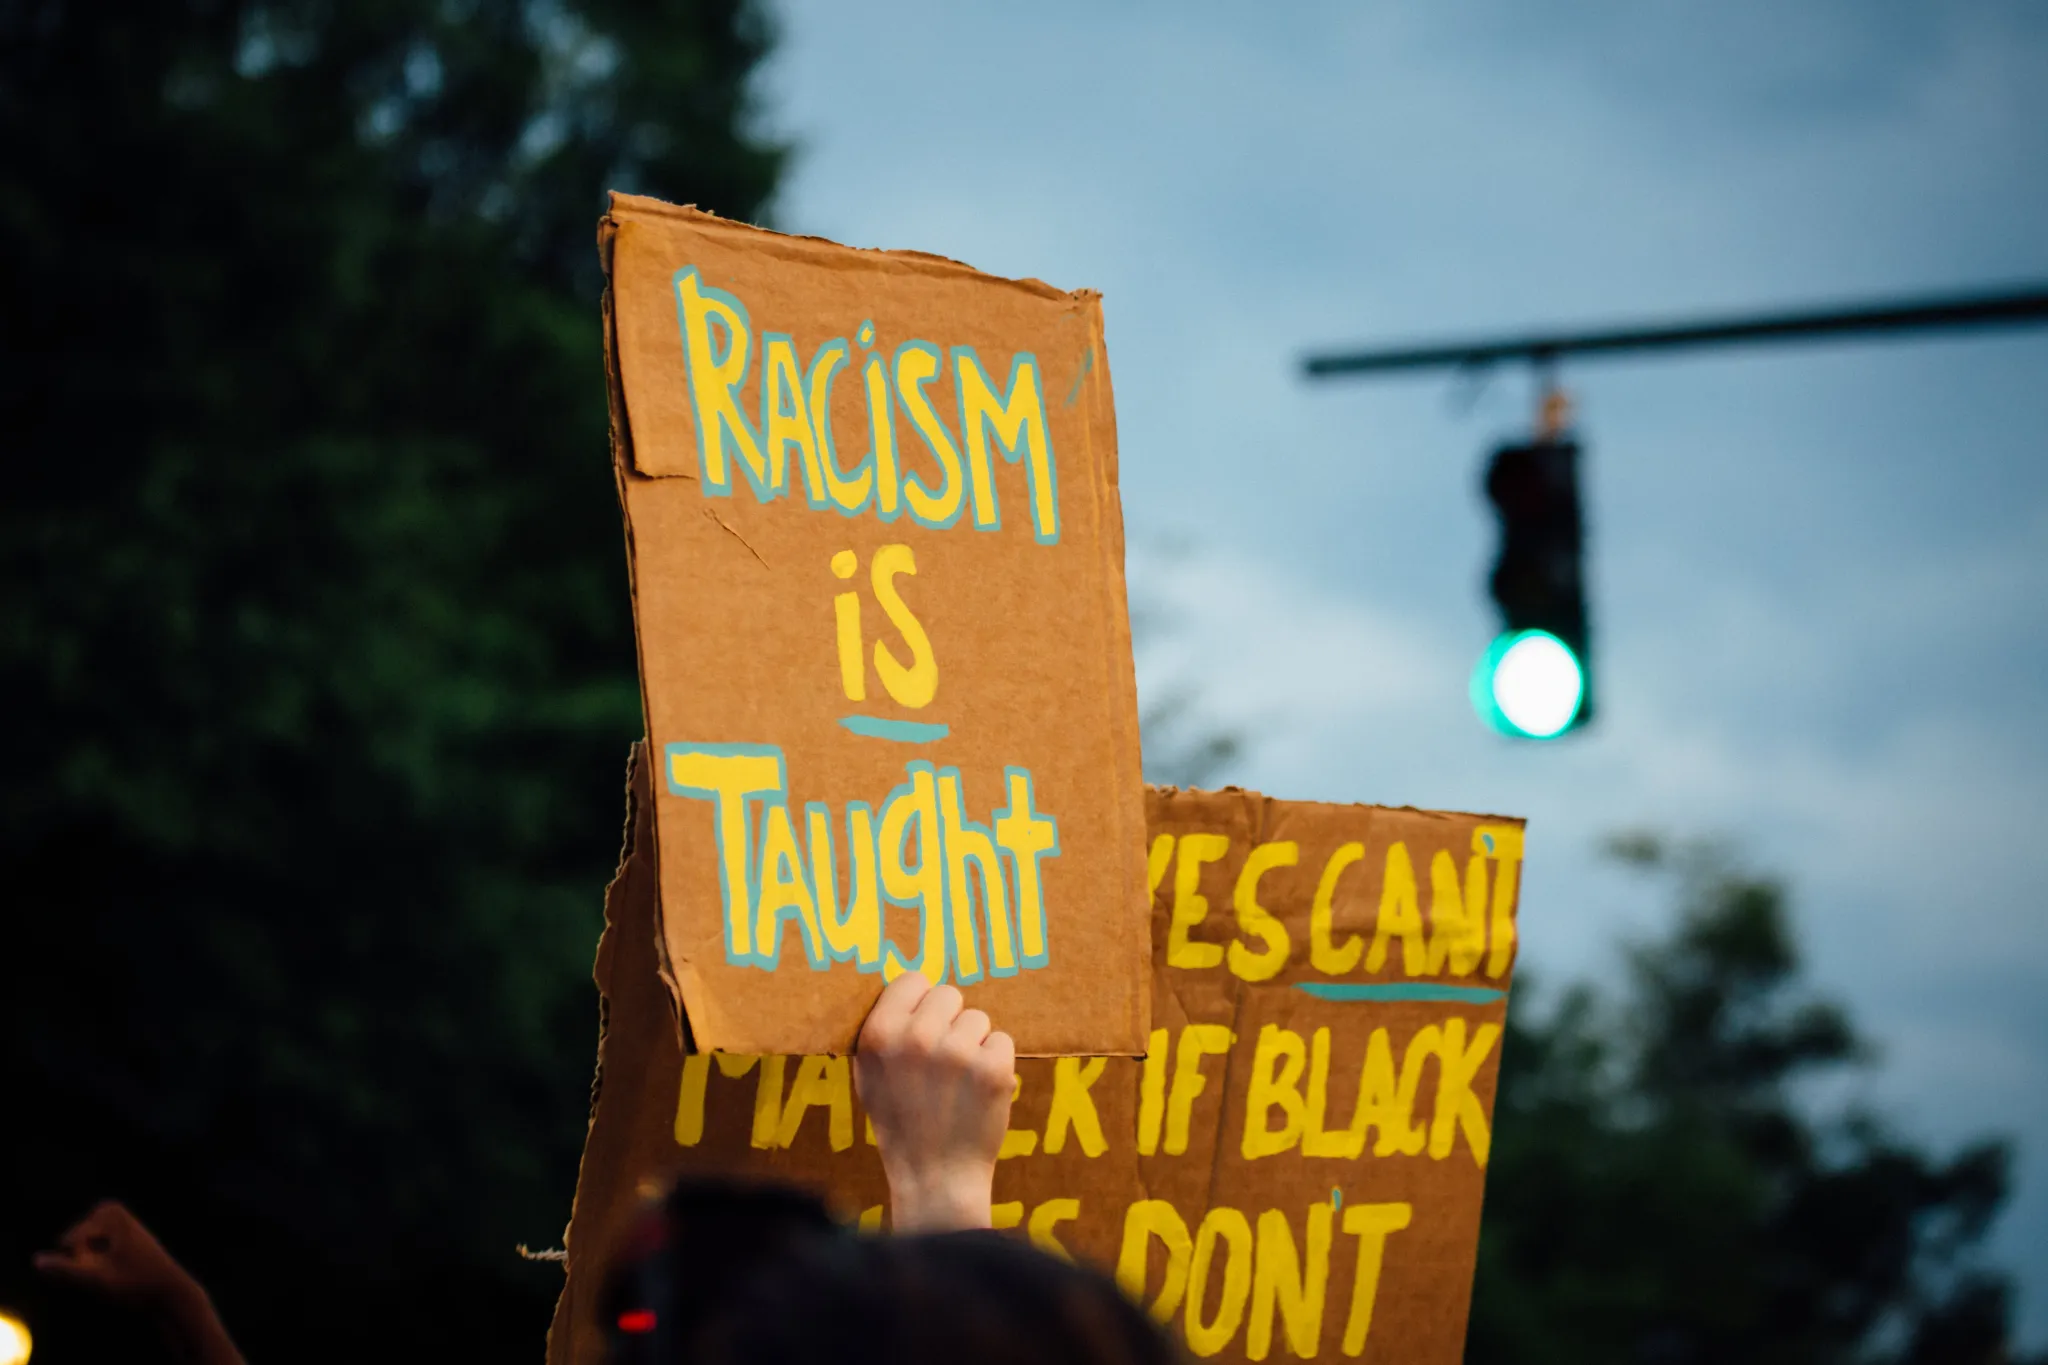 Breaking Down the Bible’s Perspective on Racism